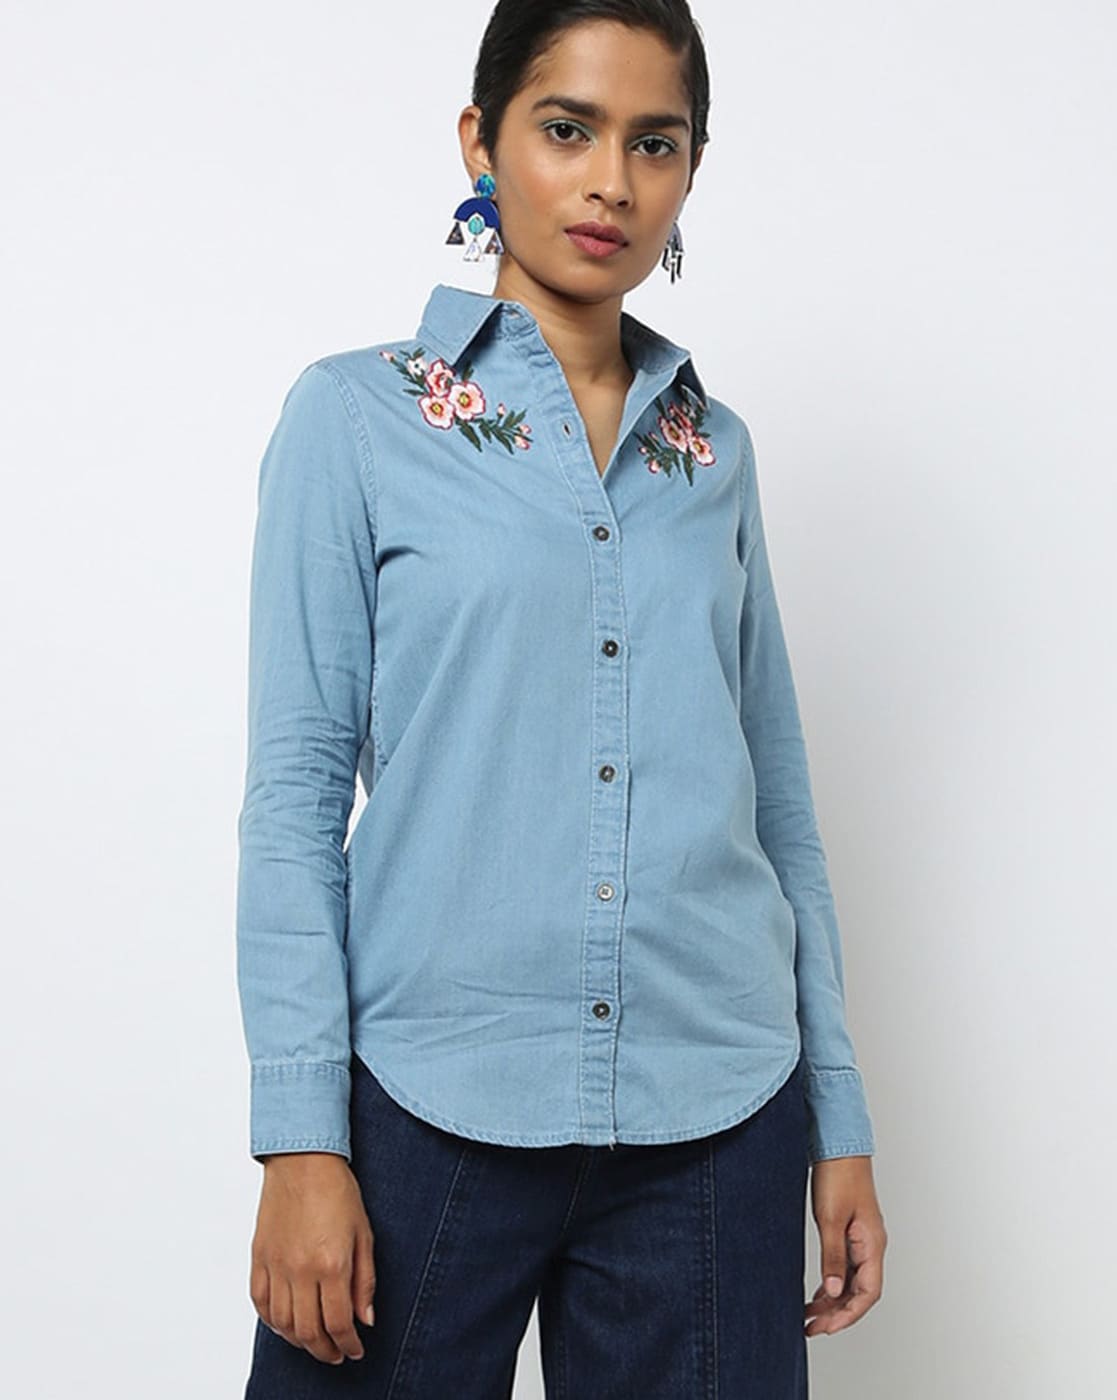 Buy Zilcremo Women Denim Shirt Chambray Collared Jean Shirts Long Sleeve  Pocket Button Down Blouses, Blue, X-Large at Amazon.in